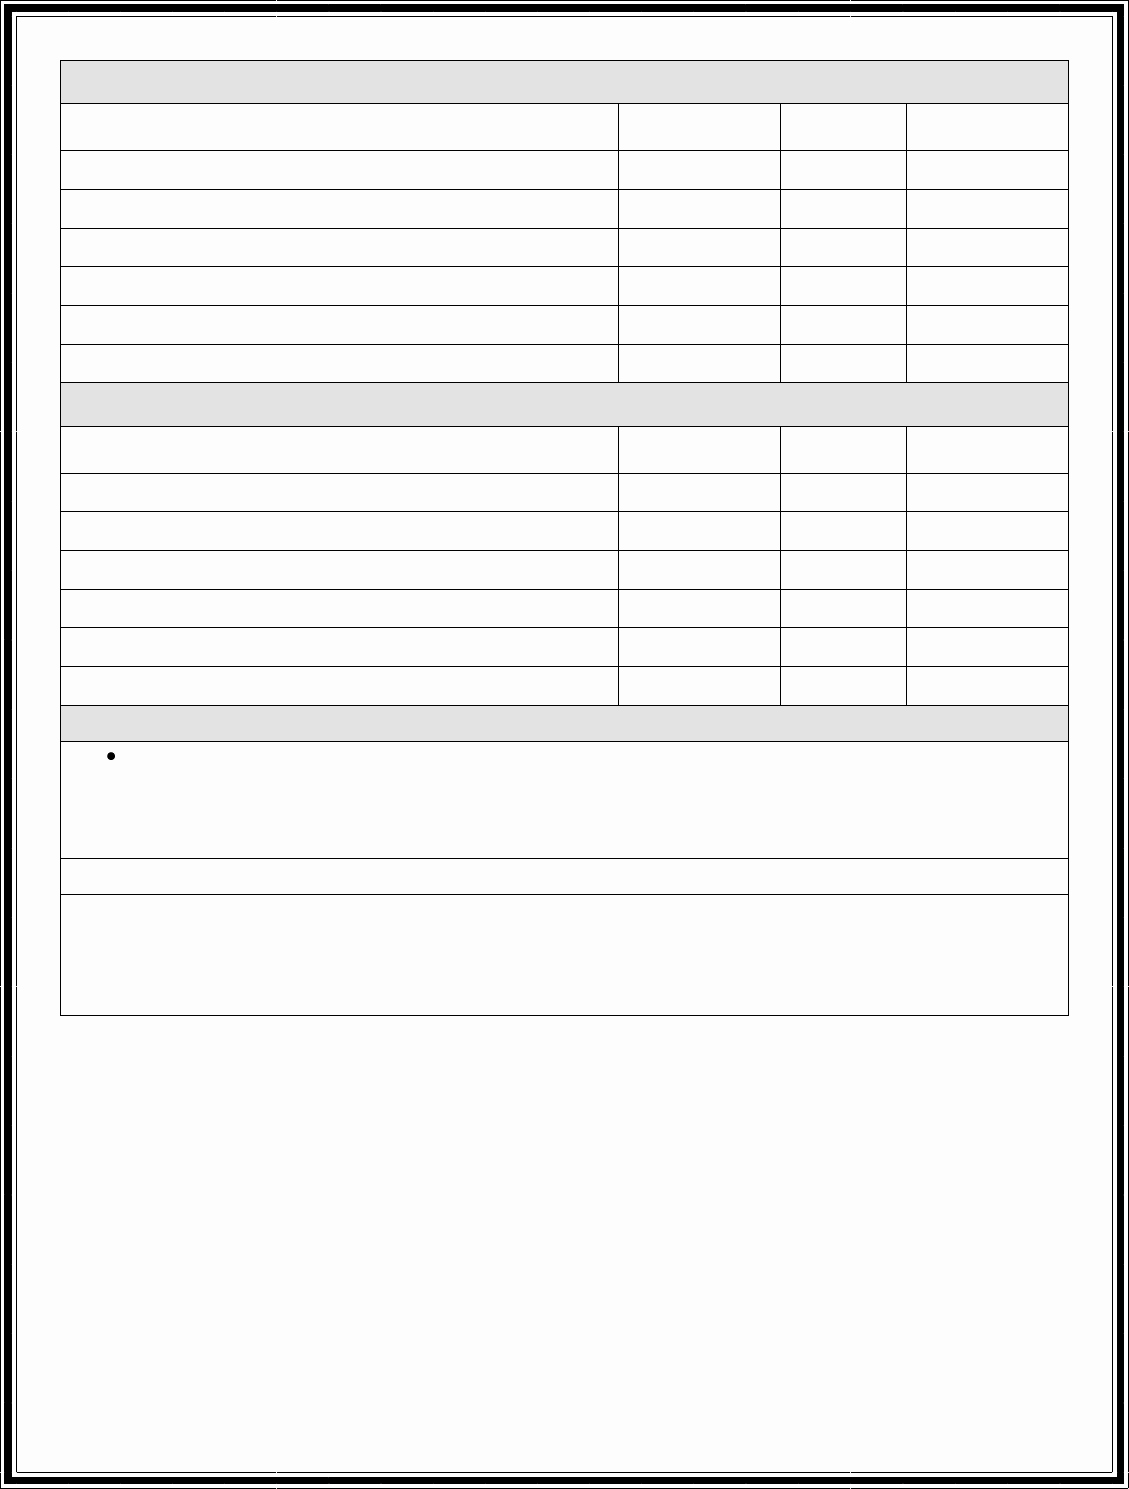 Meeting Agenda with Notes Template Inspirational Agenda and Meeting Notes Template In Word and Pdf formats